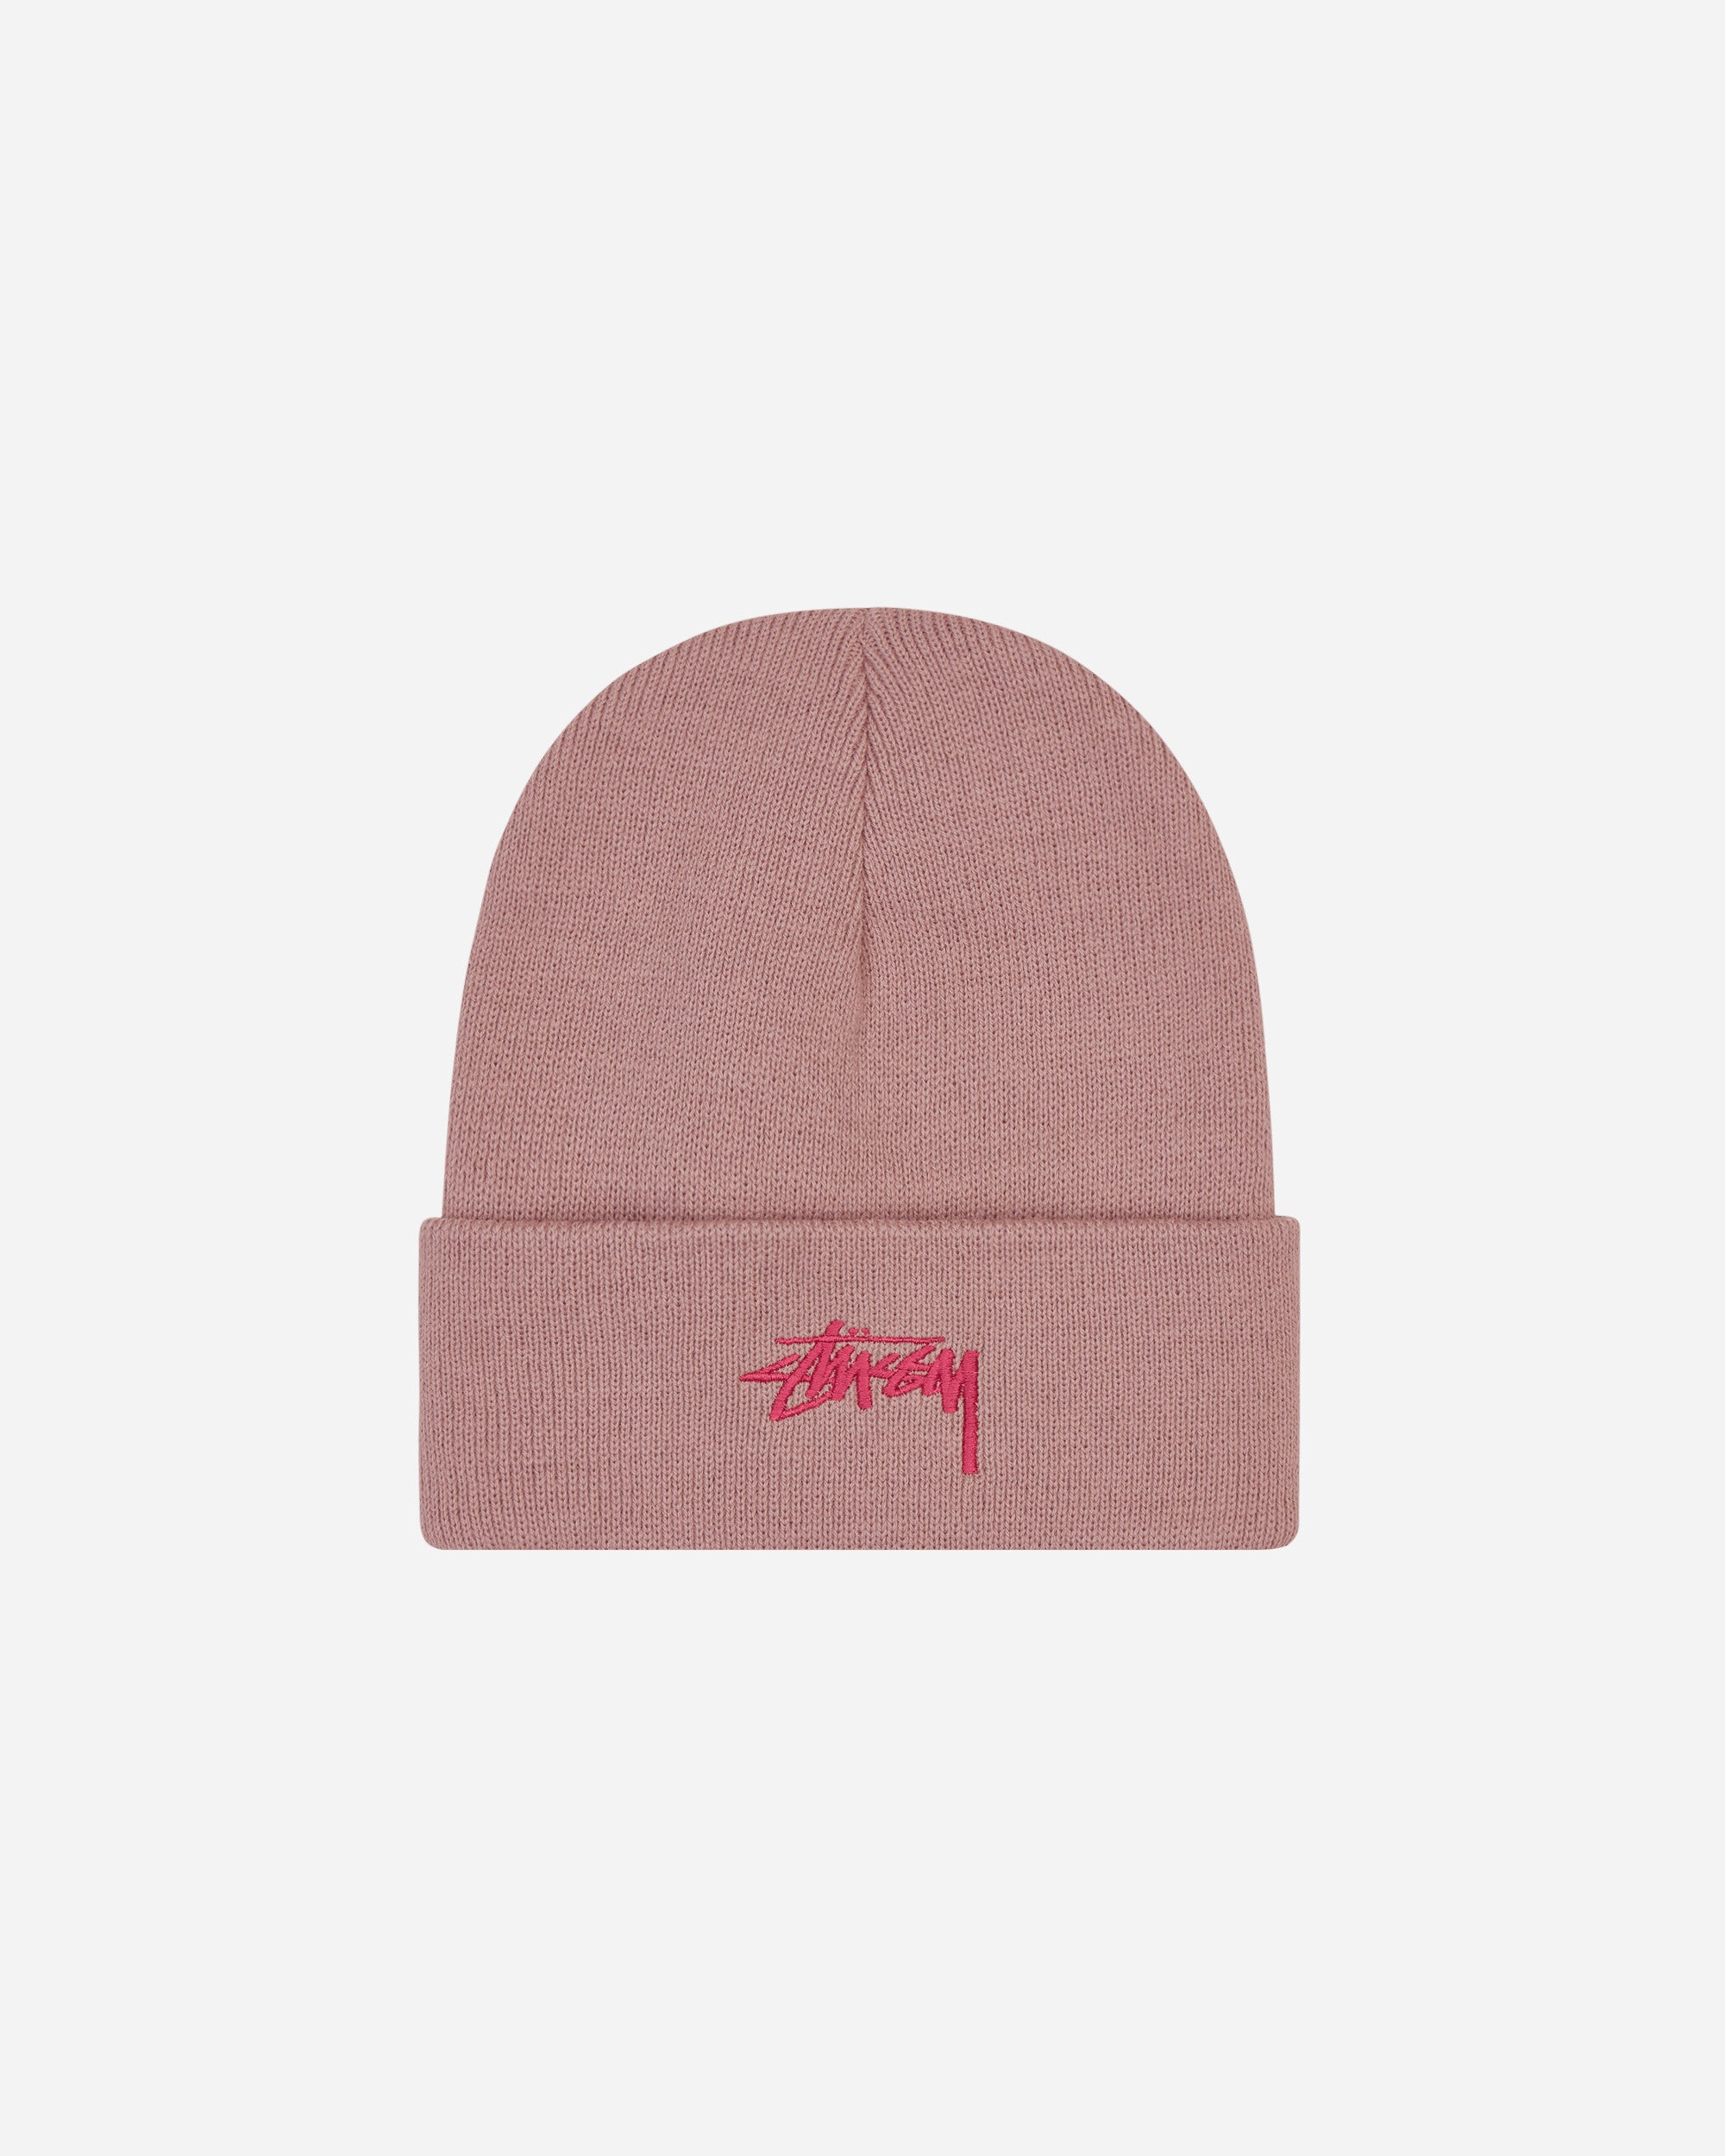 Stüssy Stock Cuff Beanie Lavender - Jam Official Store